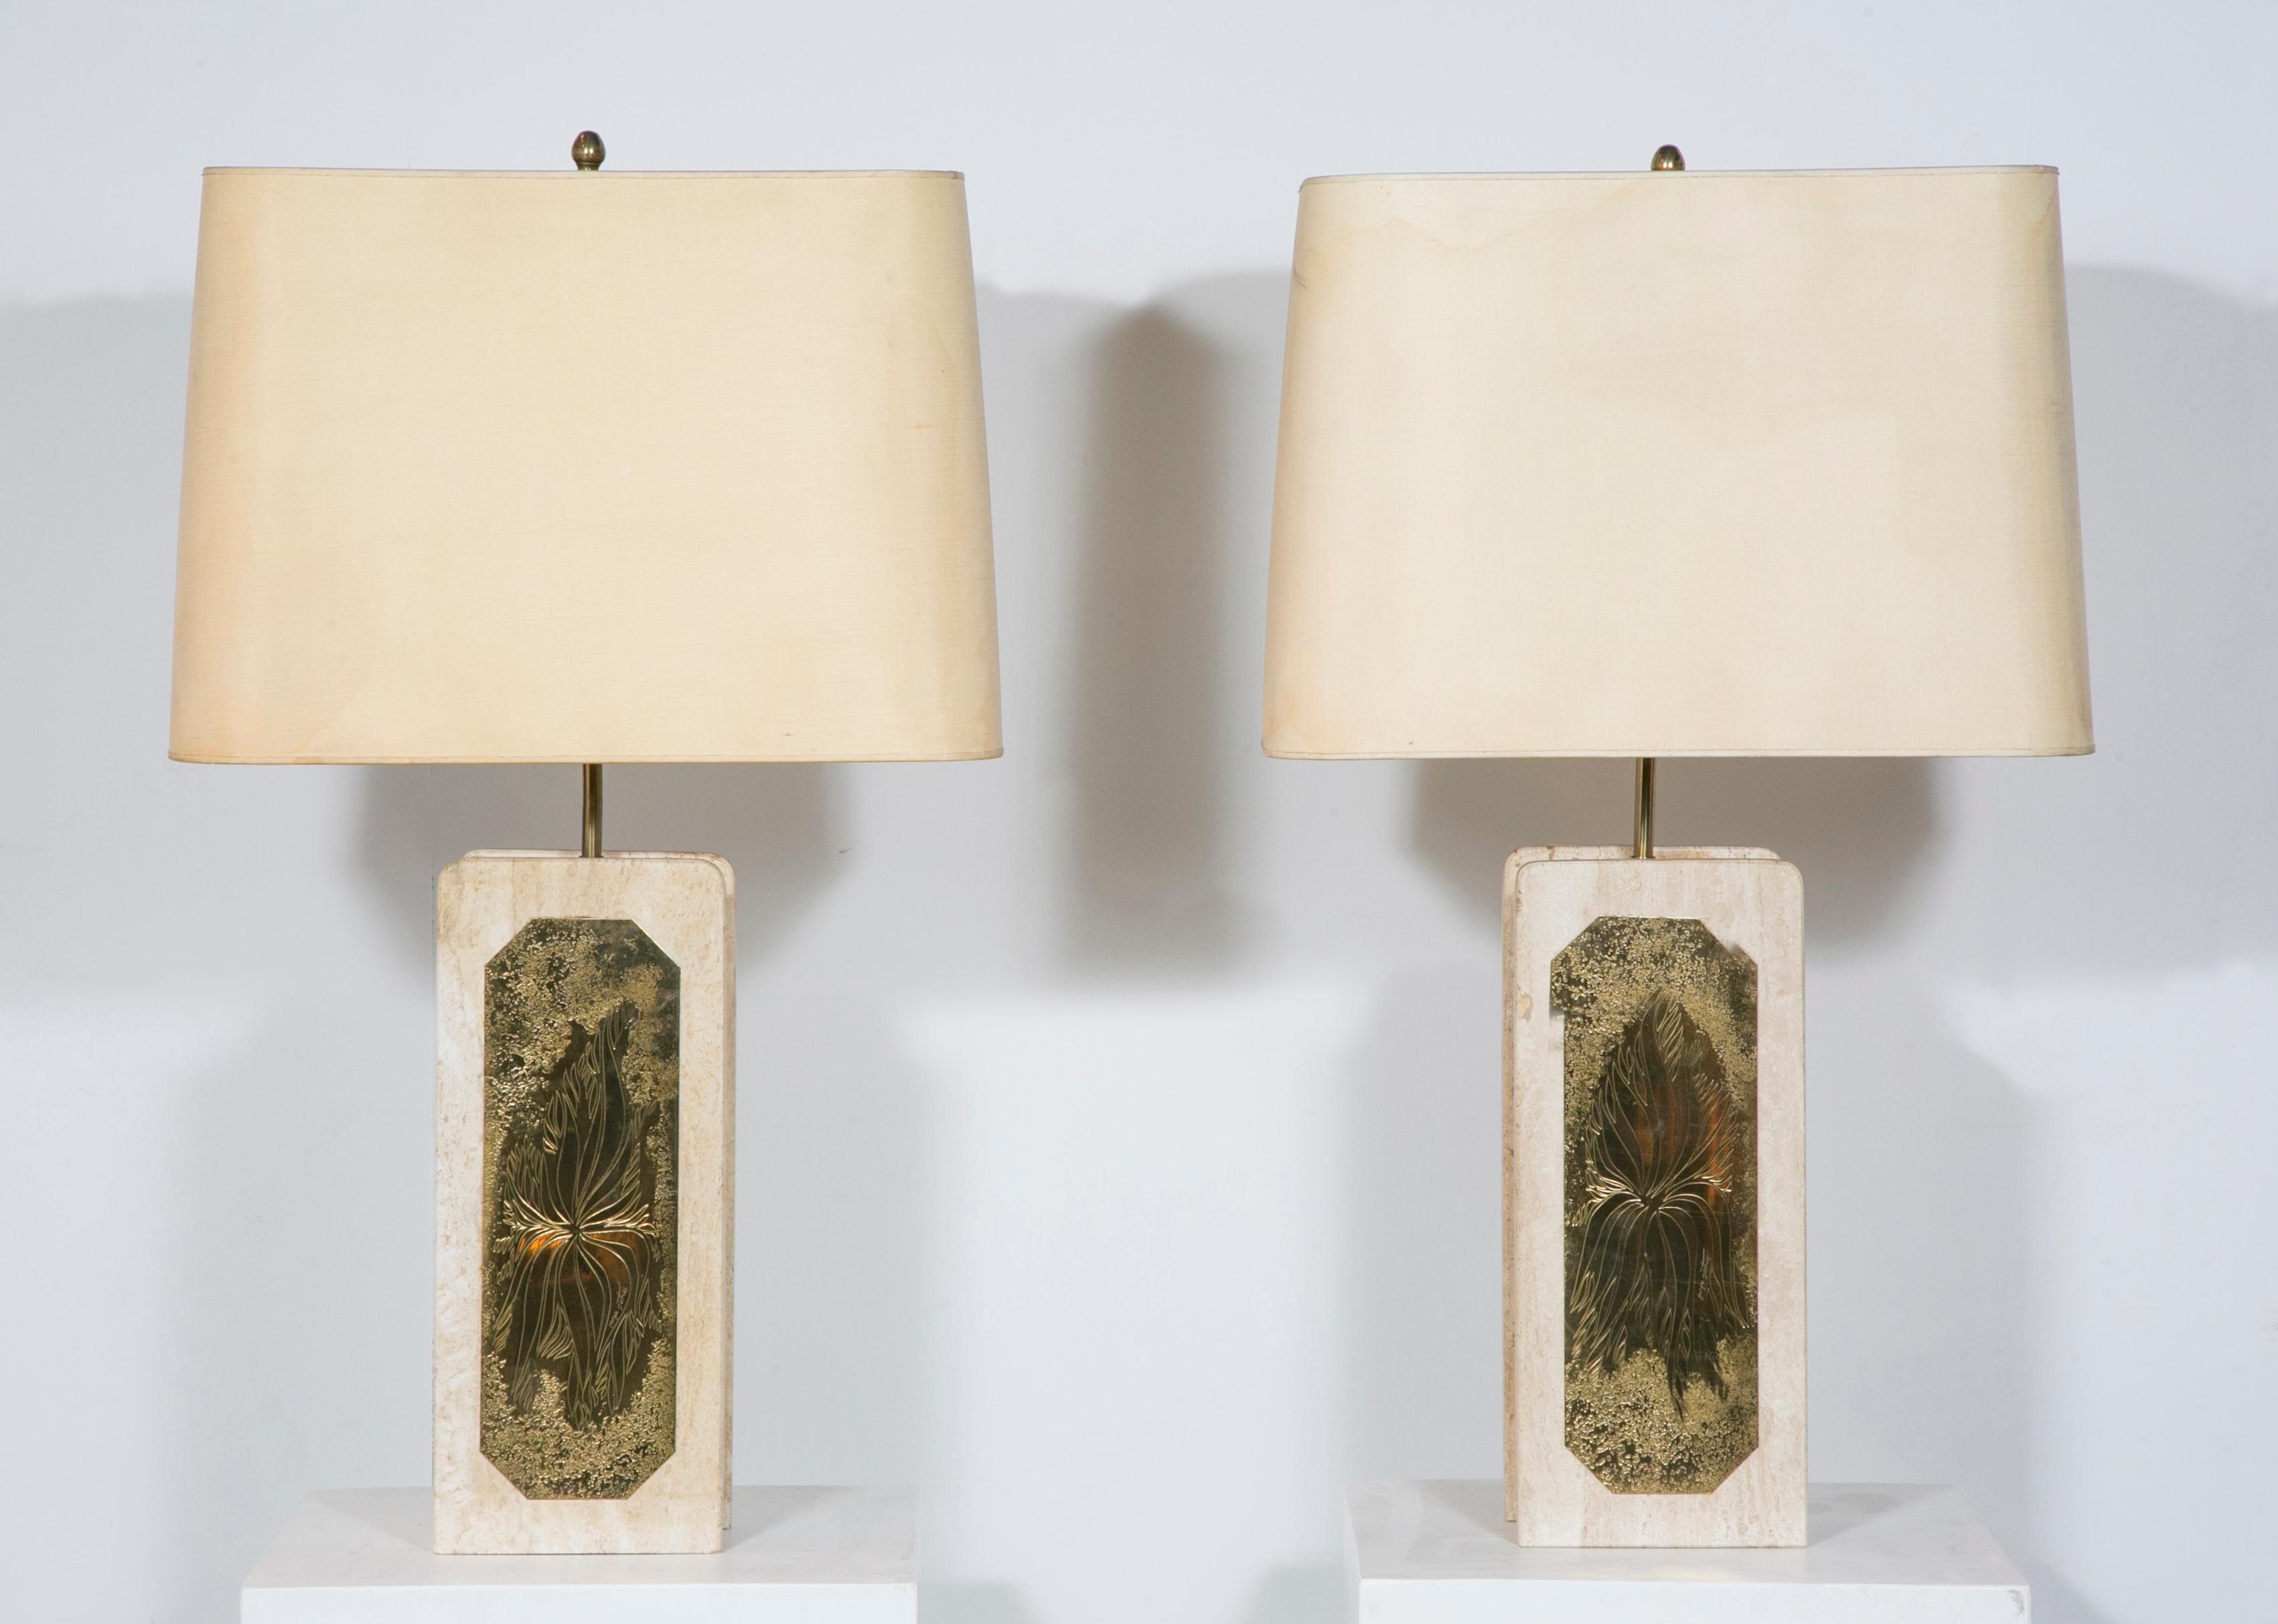 This beige marbled table lamp by Belgian artist Georges Mathias has an etched brass plaque, and is signed Georges Mathias.